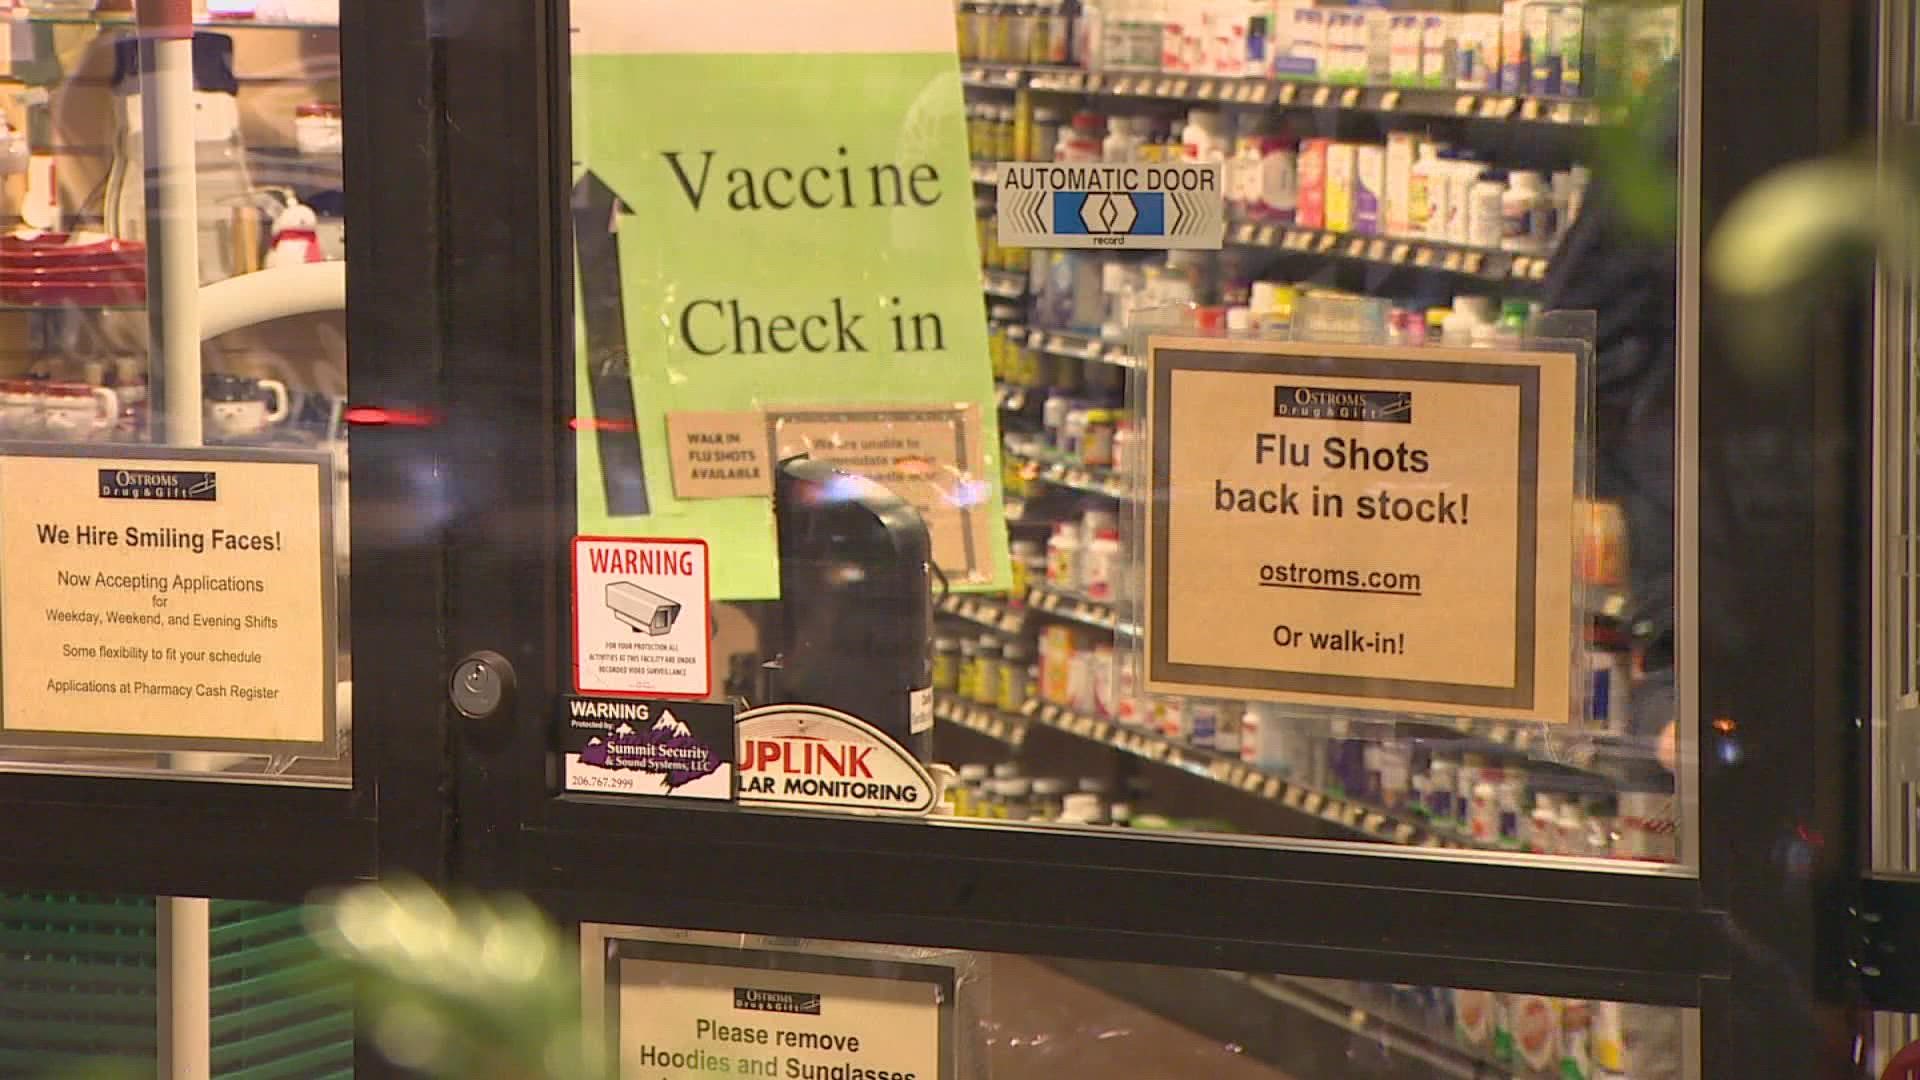 Local healthcare workers told KING 5 Thursday that ahead of Christmas, demand is now rising for immunizations to protect against such viruses.